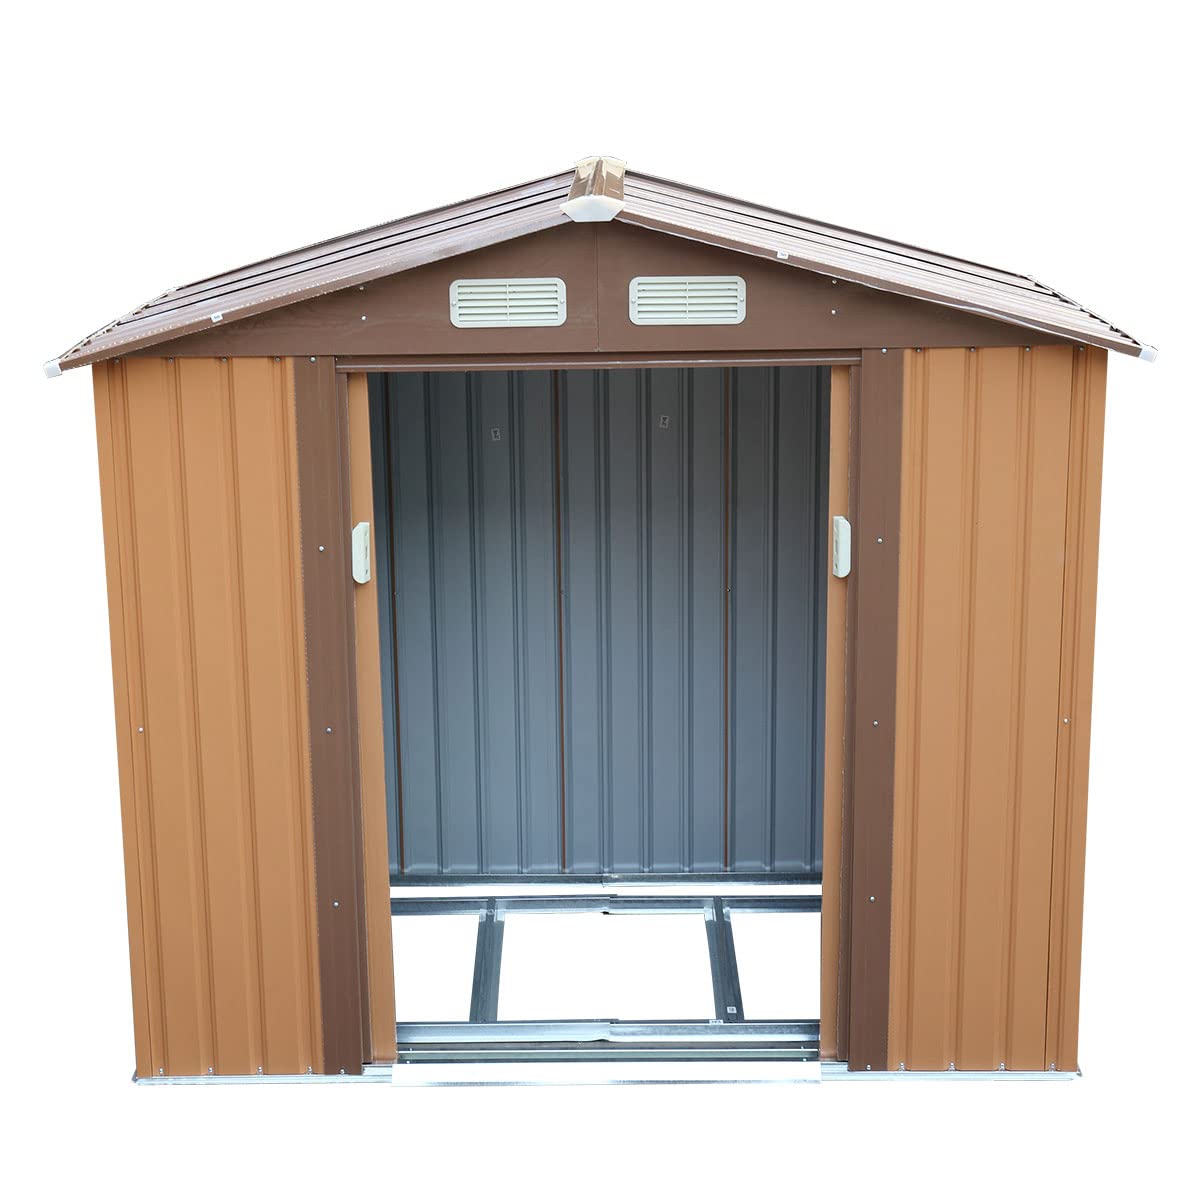 NBTiger 4.2’ x 7’ Large Outdoor Storage Shed, Sturdy Utility Tool Lawn Mower Equipment Organizer for Backyard Garden w/Gable Roof, Lockable Sliding Door, Vents - Coffee